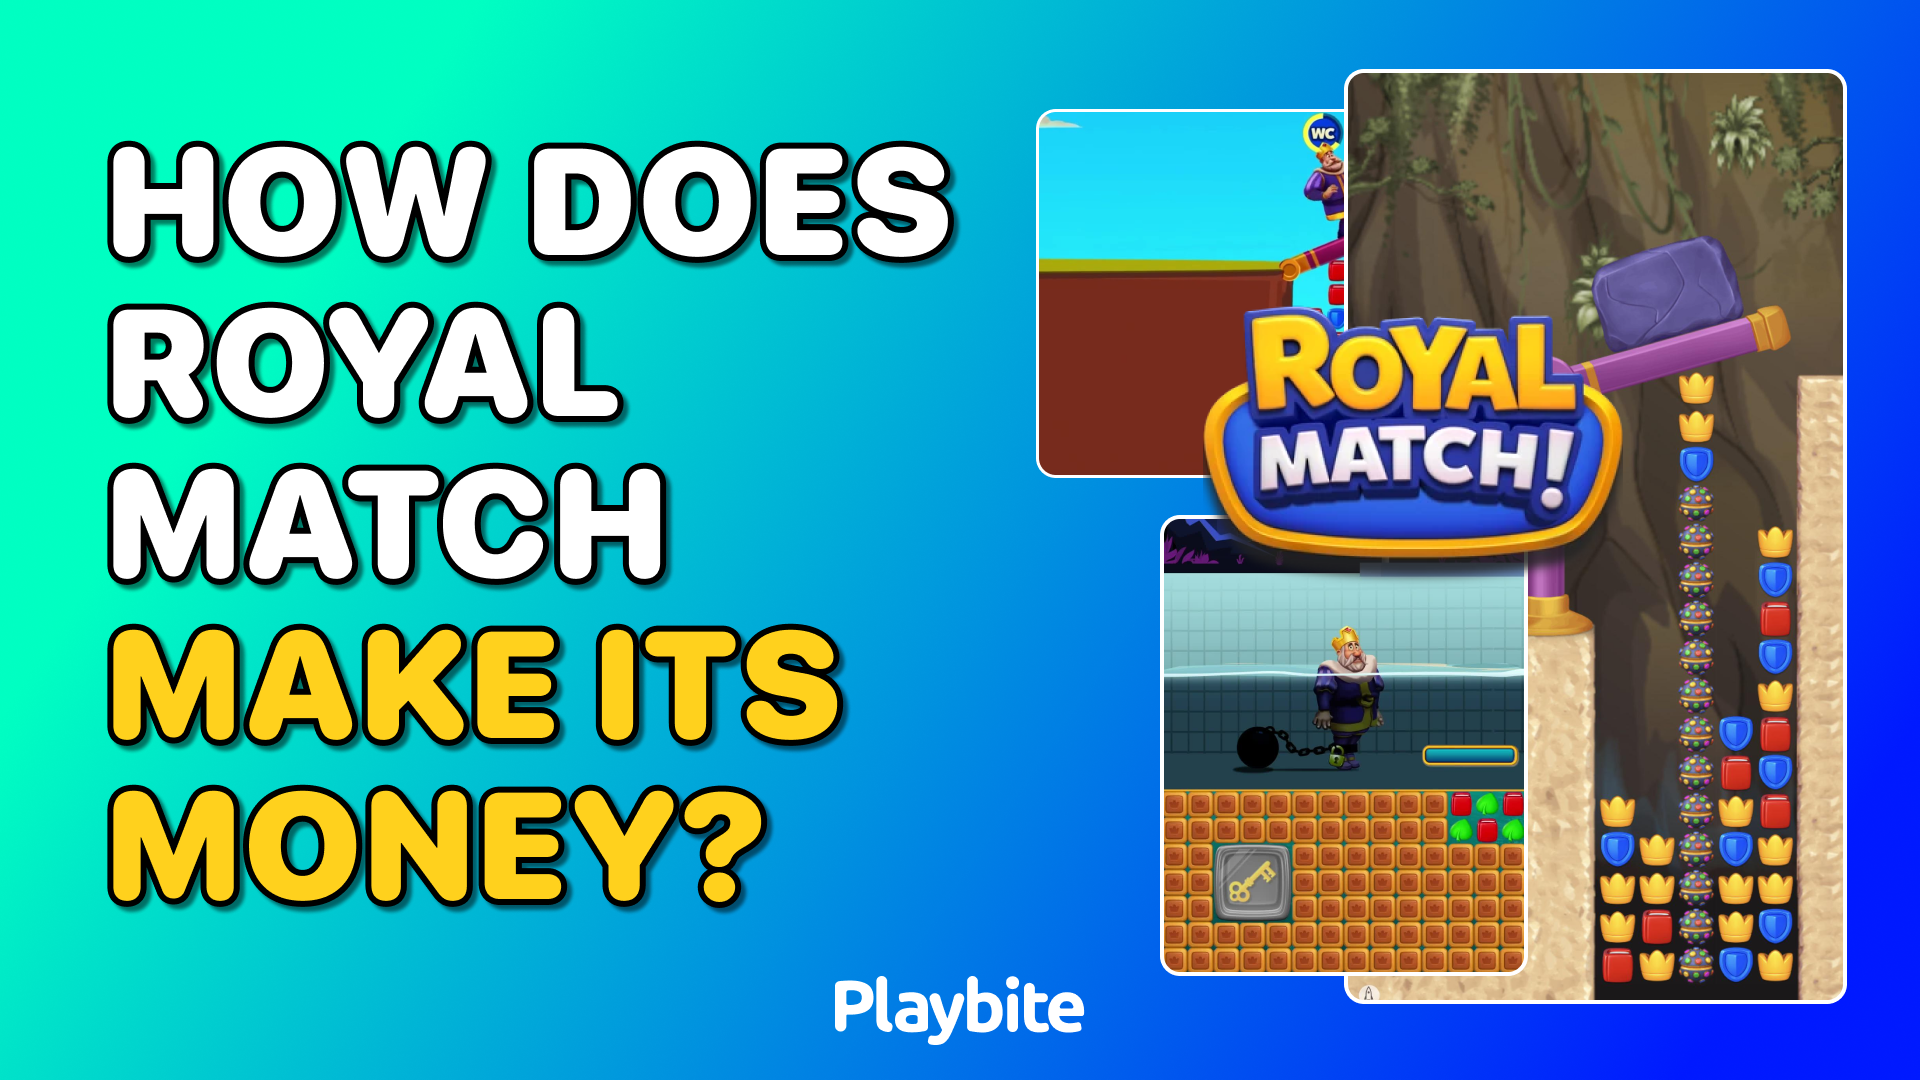 How Does Royal Match Make Its Money?